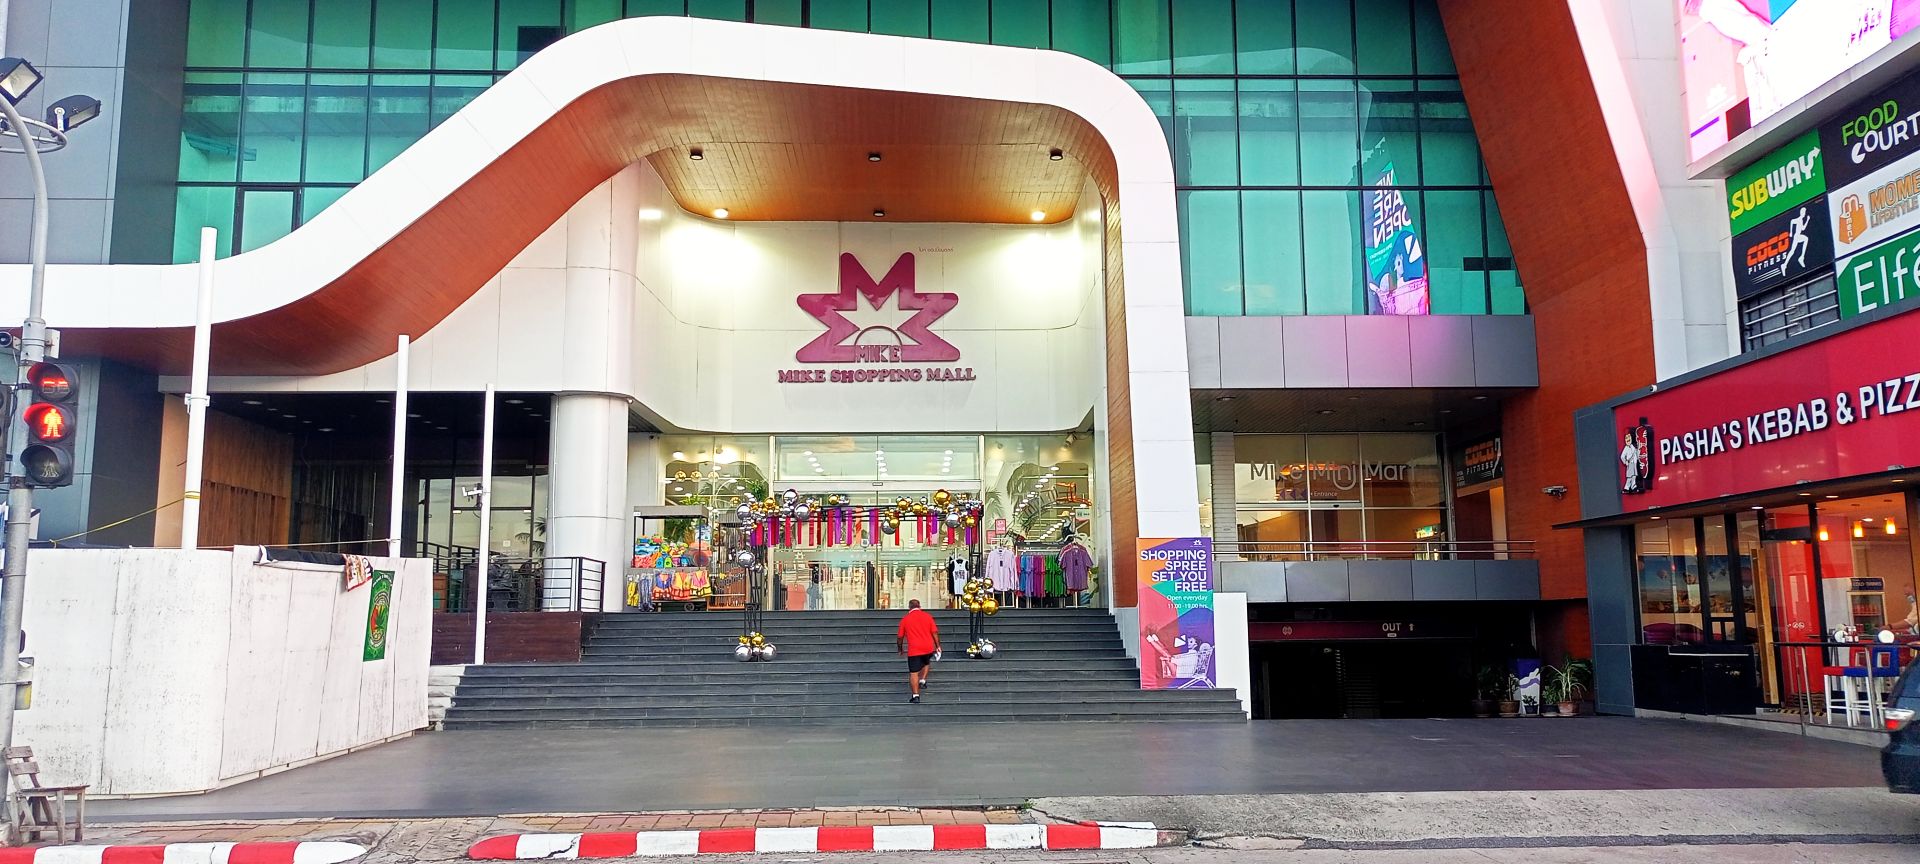 Mike Shopping Mall reopened